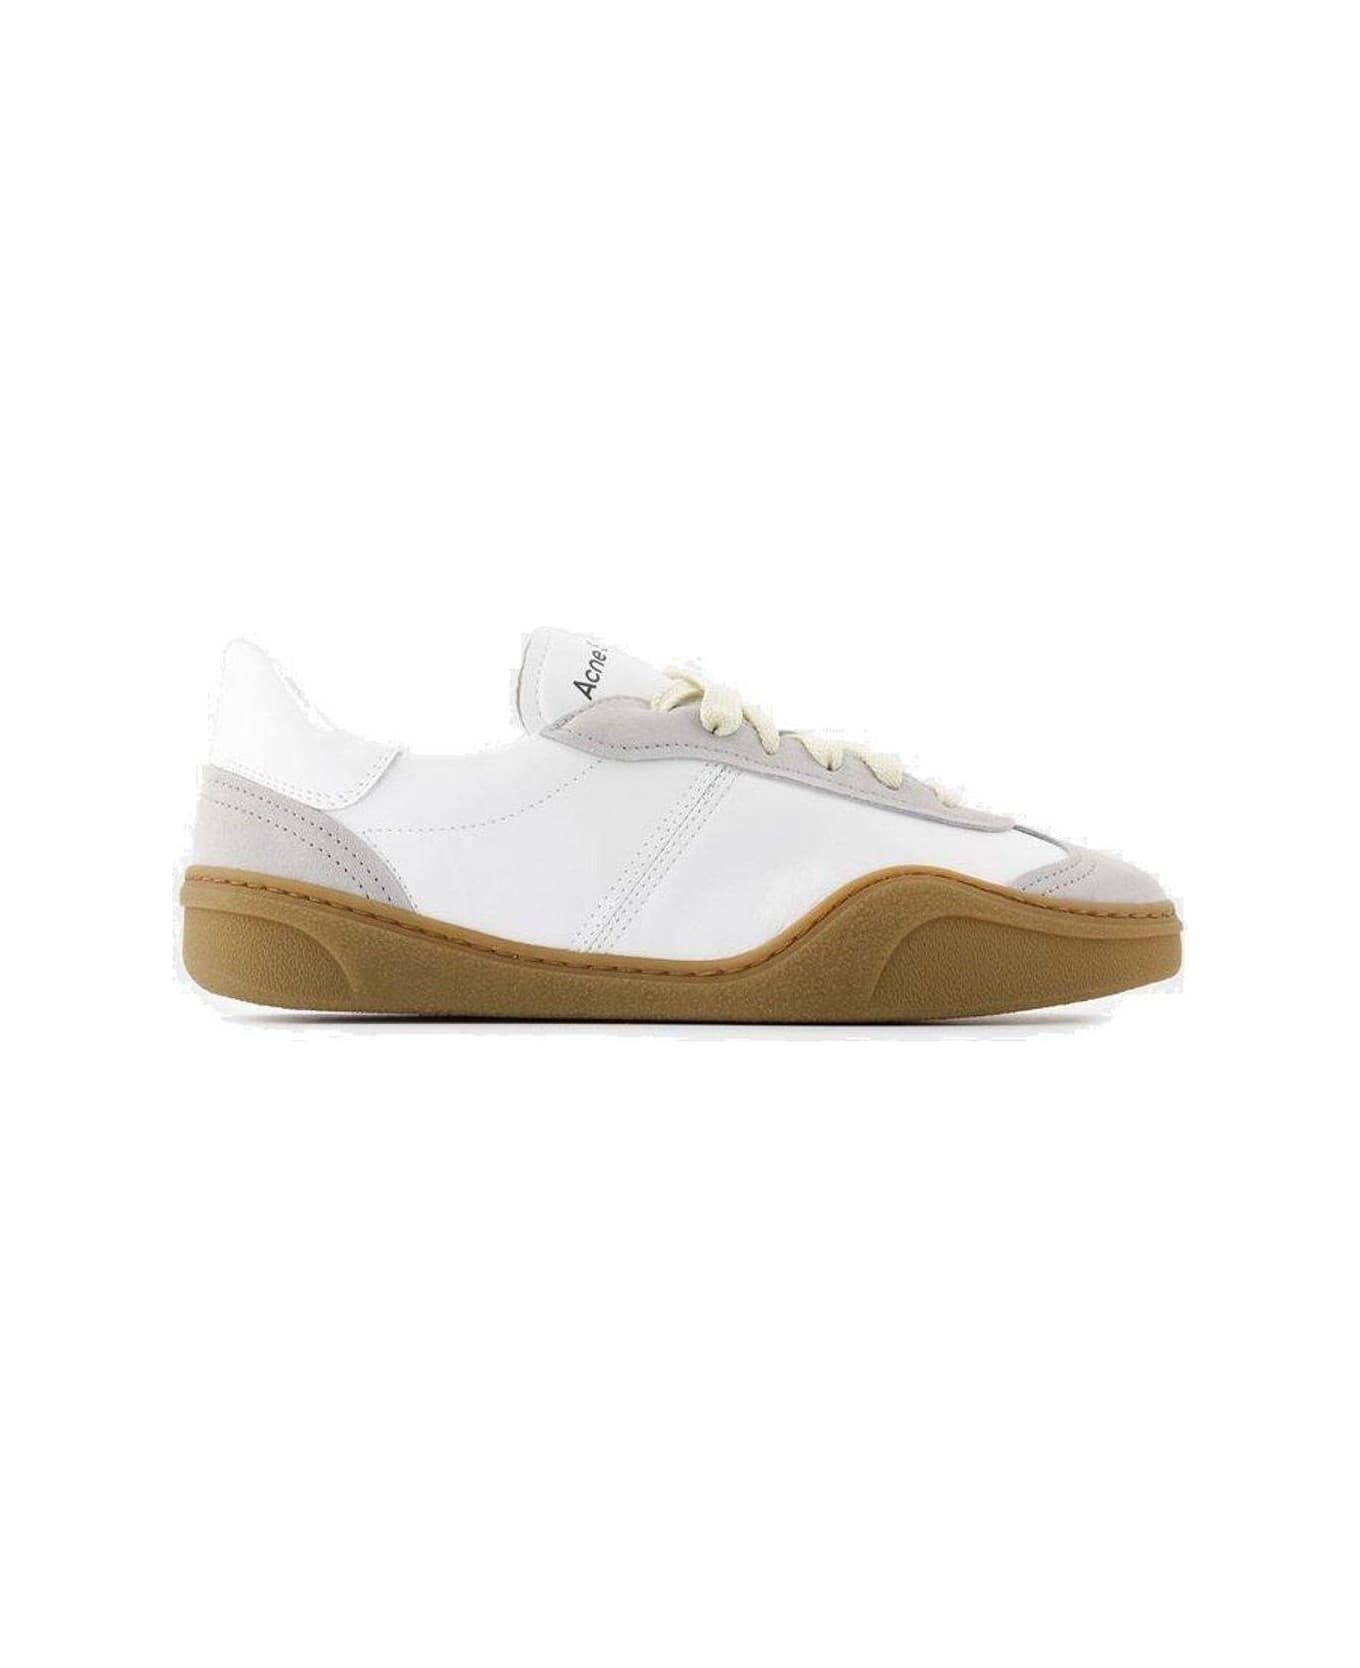 Acne Studios Lace-up Sneakers - White スニーカー